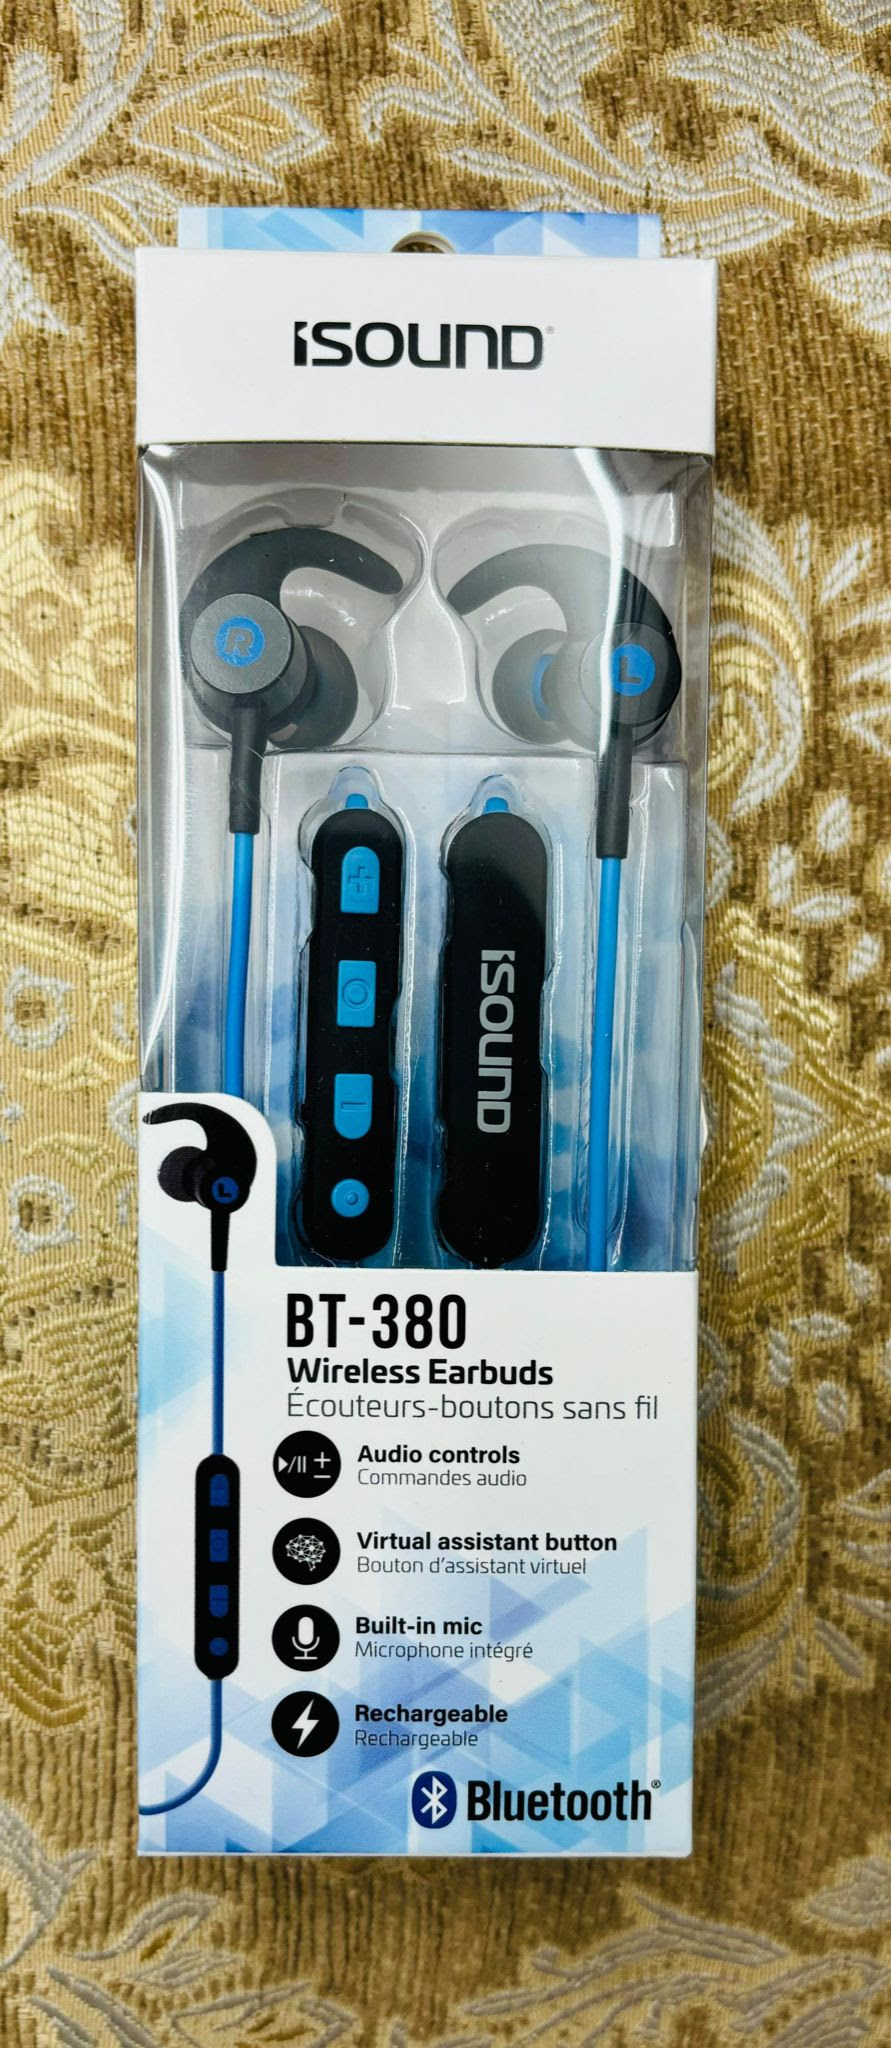 iSound BT-380 Bluetooth Stereo Earbuds With Microphone.